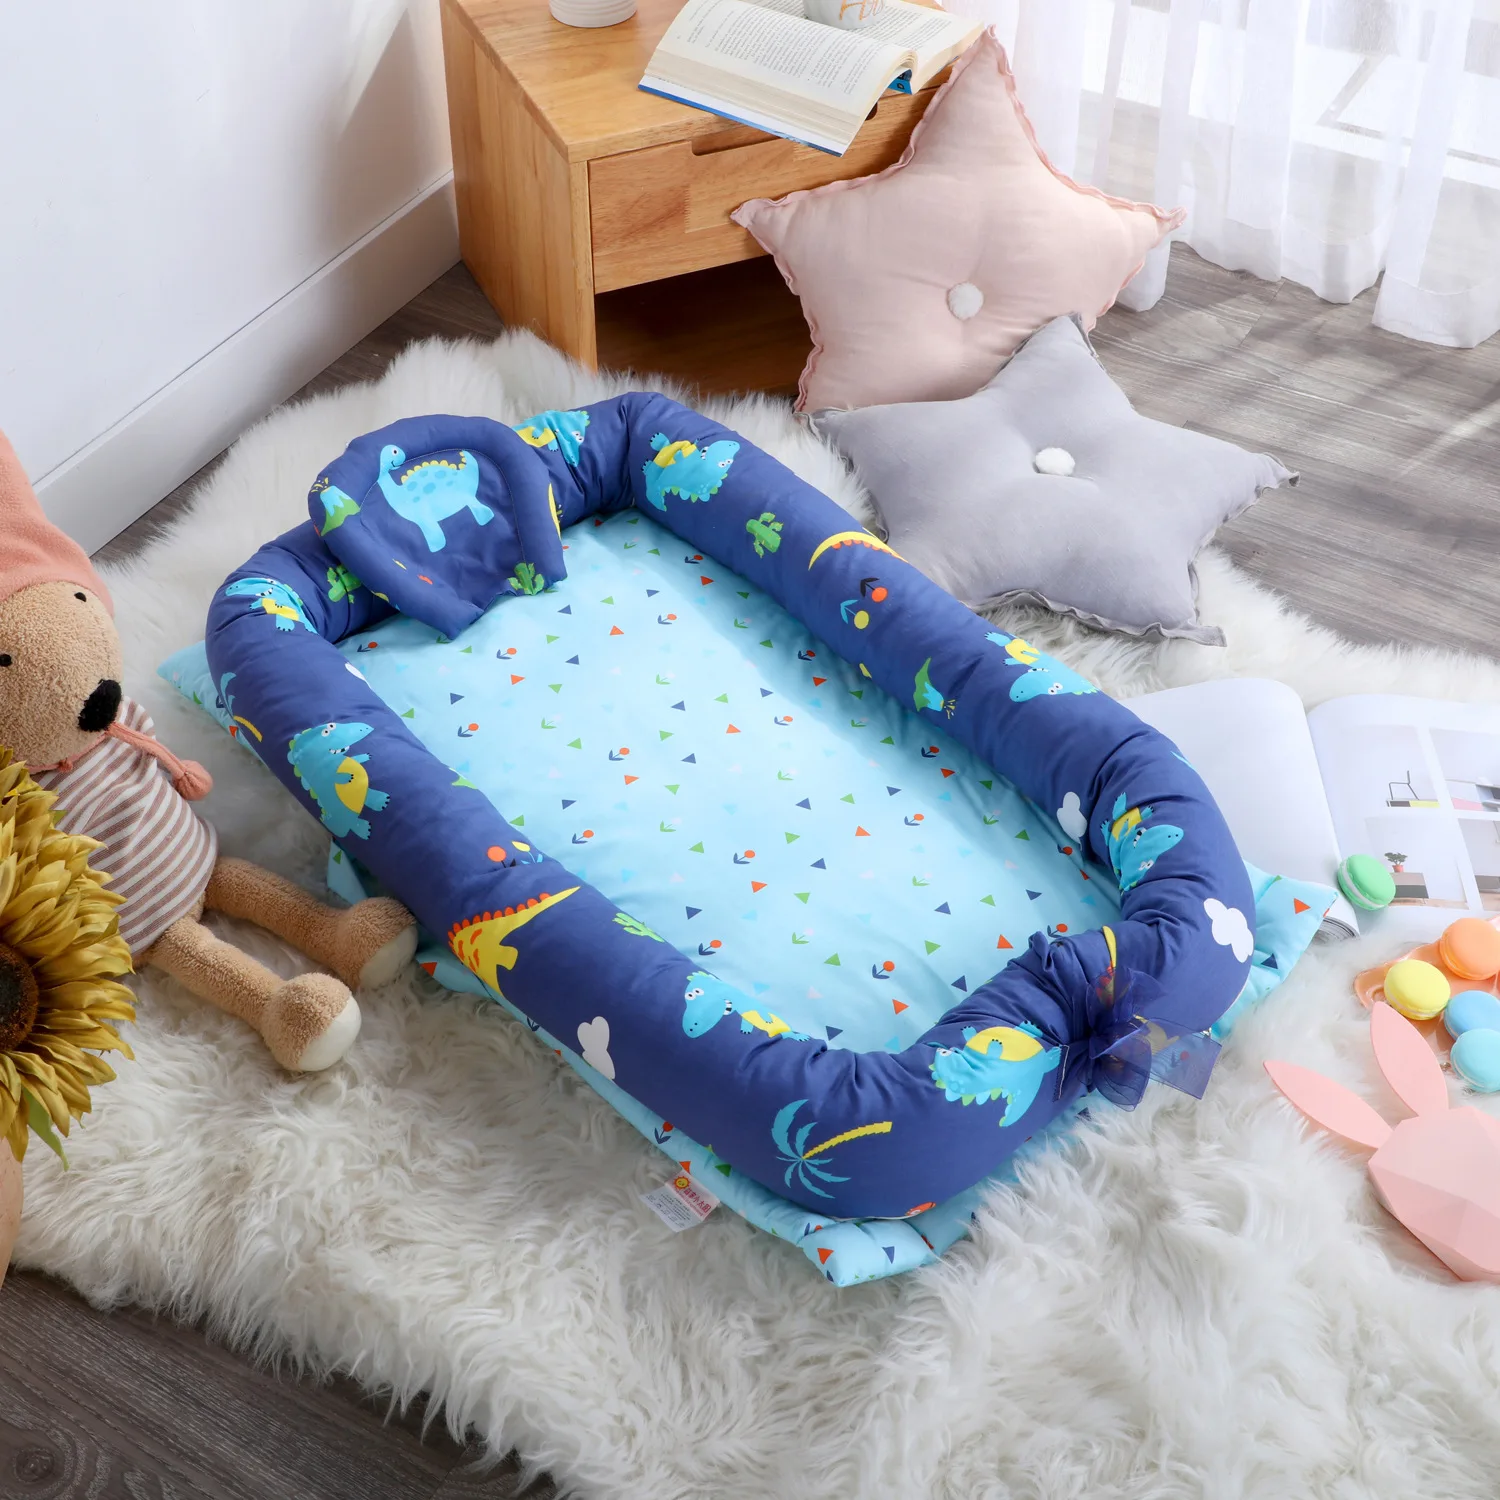 

Baby Bionic Bed Crib Sides Portable Travel Isolated Imitate The Uterus for 0-24M Children Infant Kids Cotton Bed Nest Bumper